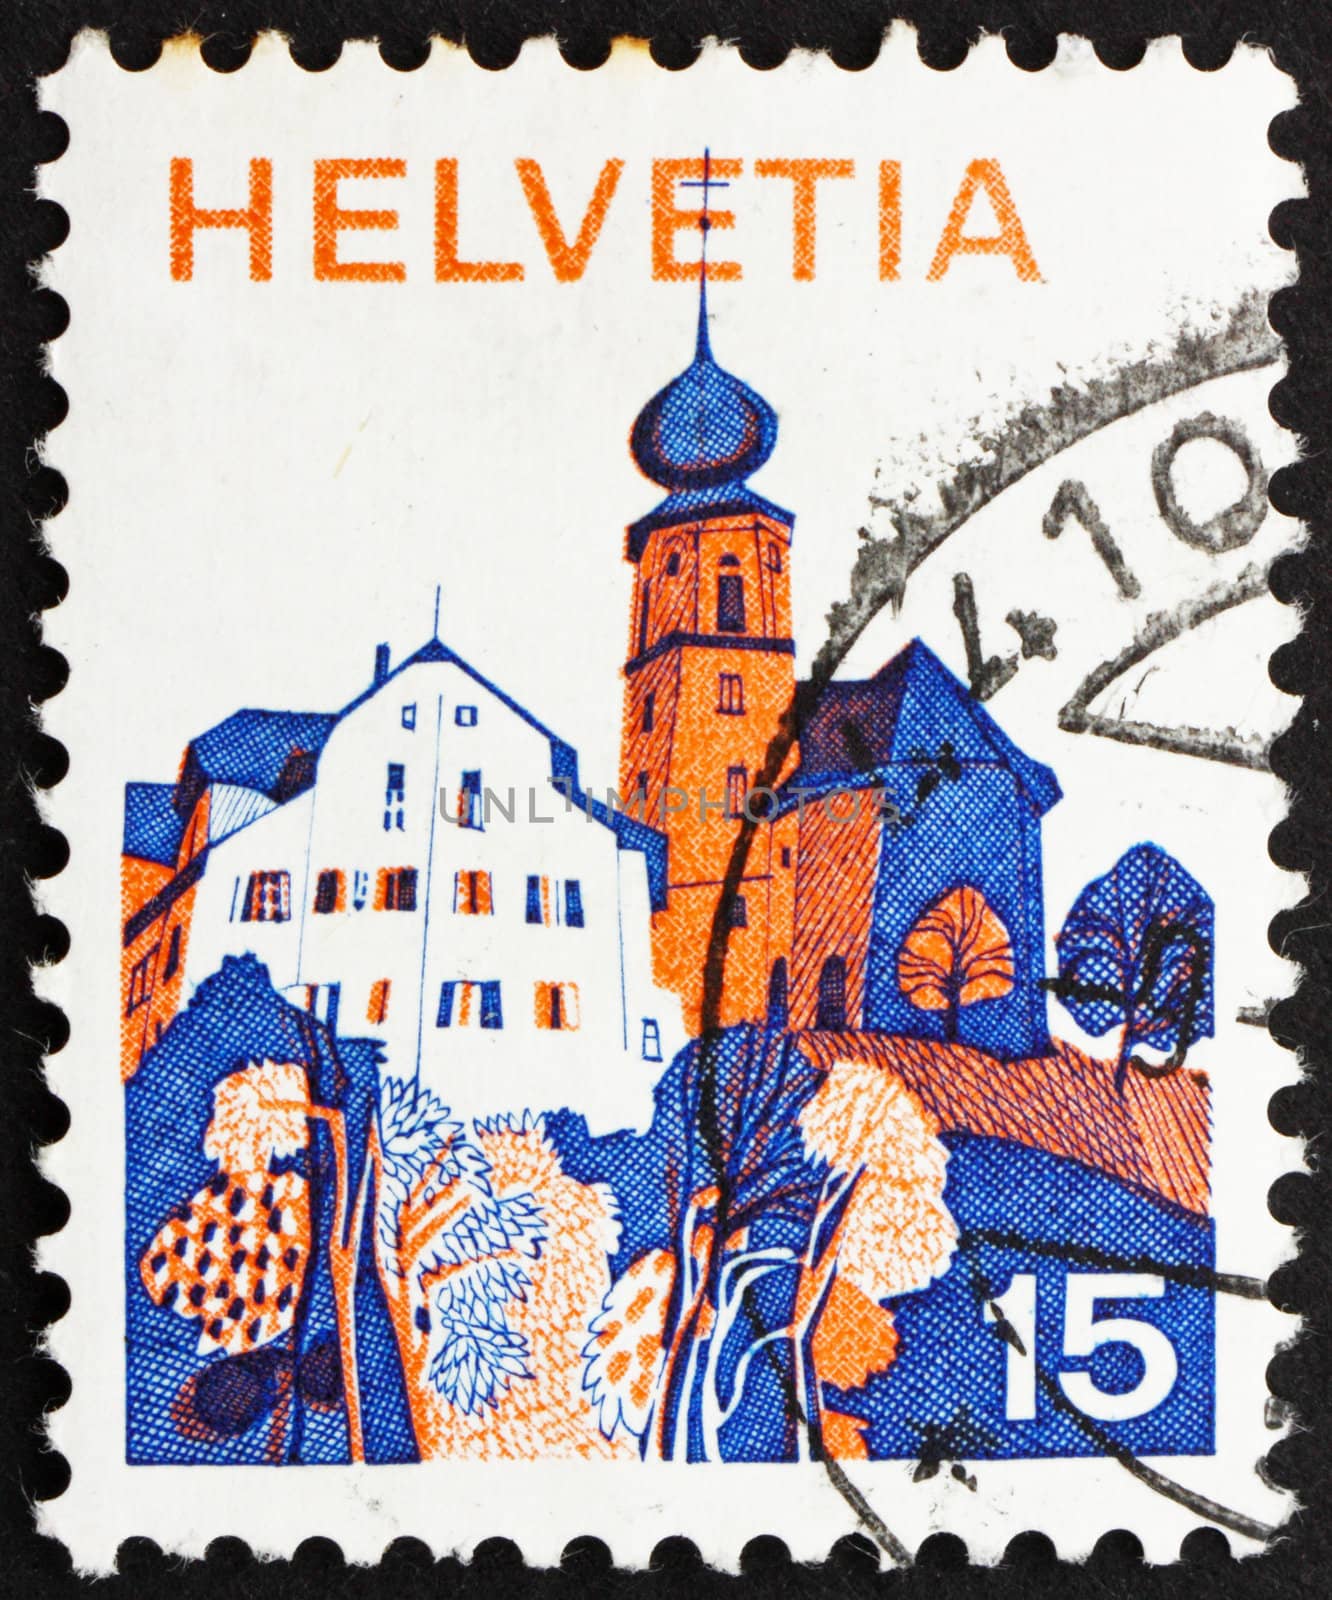 SWITZERLAND - CIRCA 1973: a stamp printed in the Switzerland shows Village in Central Switzerland, circa 1973